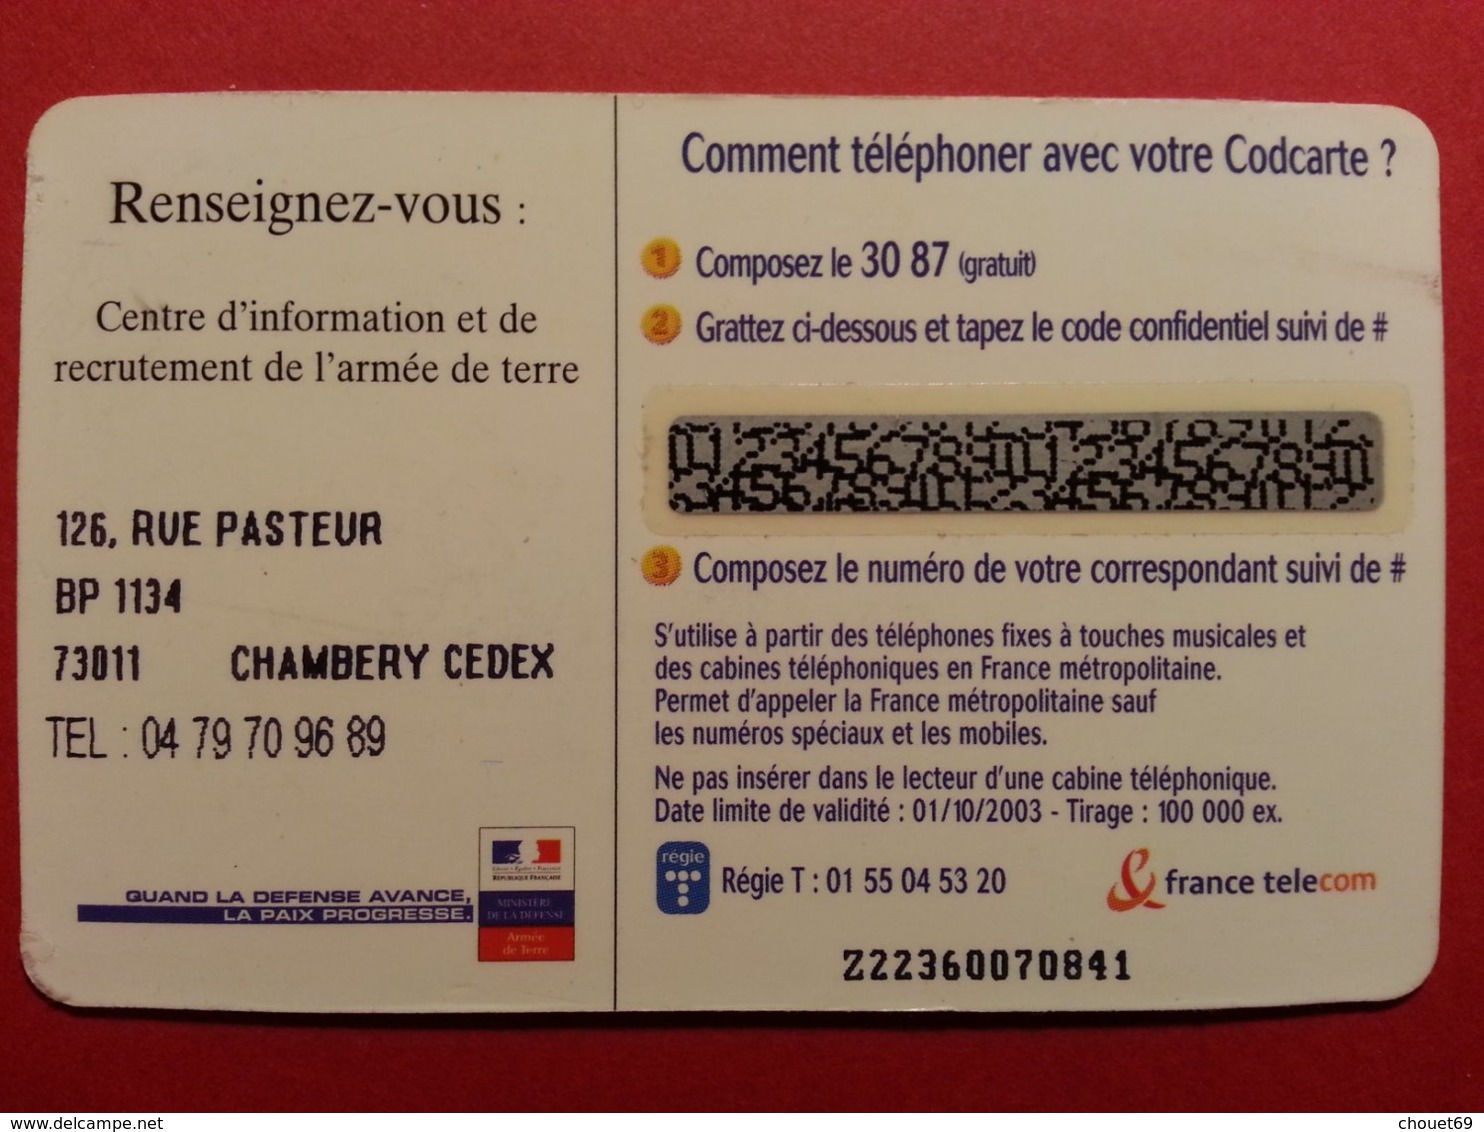 FRANCE COD CARTE ARMY ARMEE TERRE SOLDATS SOLDIER NEUVE MINT VERSO CHAMBERY CODCARTE (CN1019 - FT